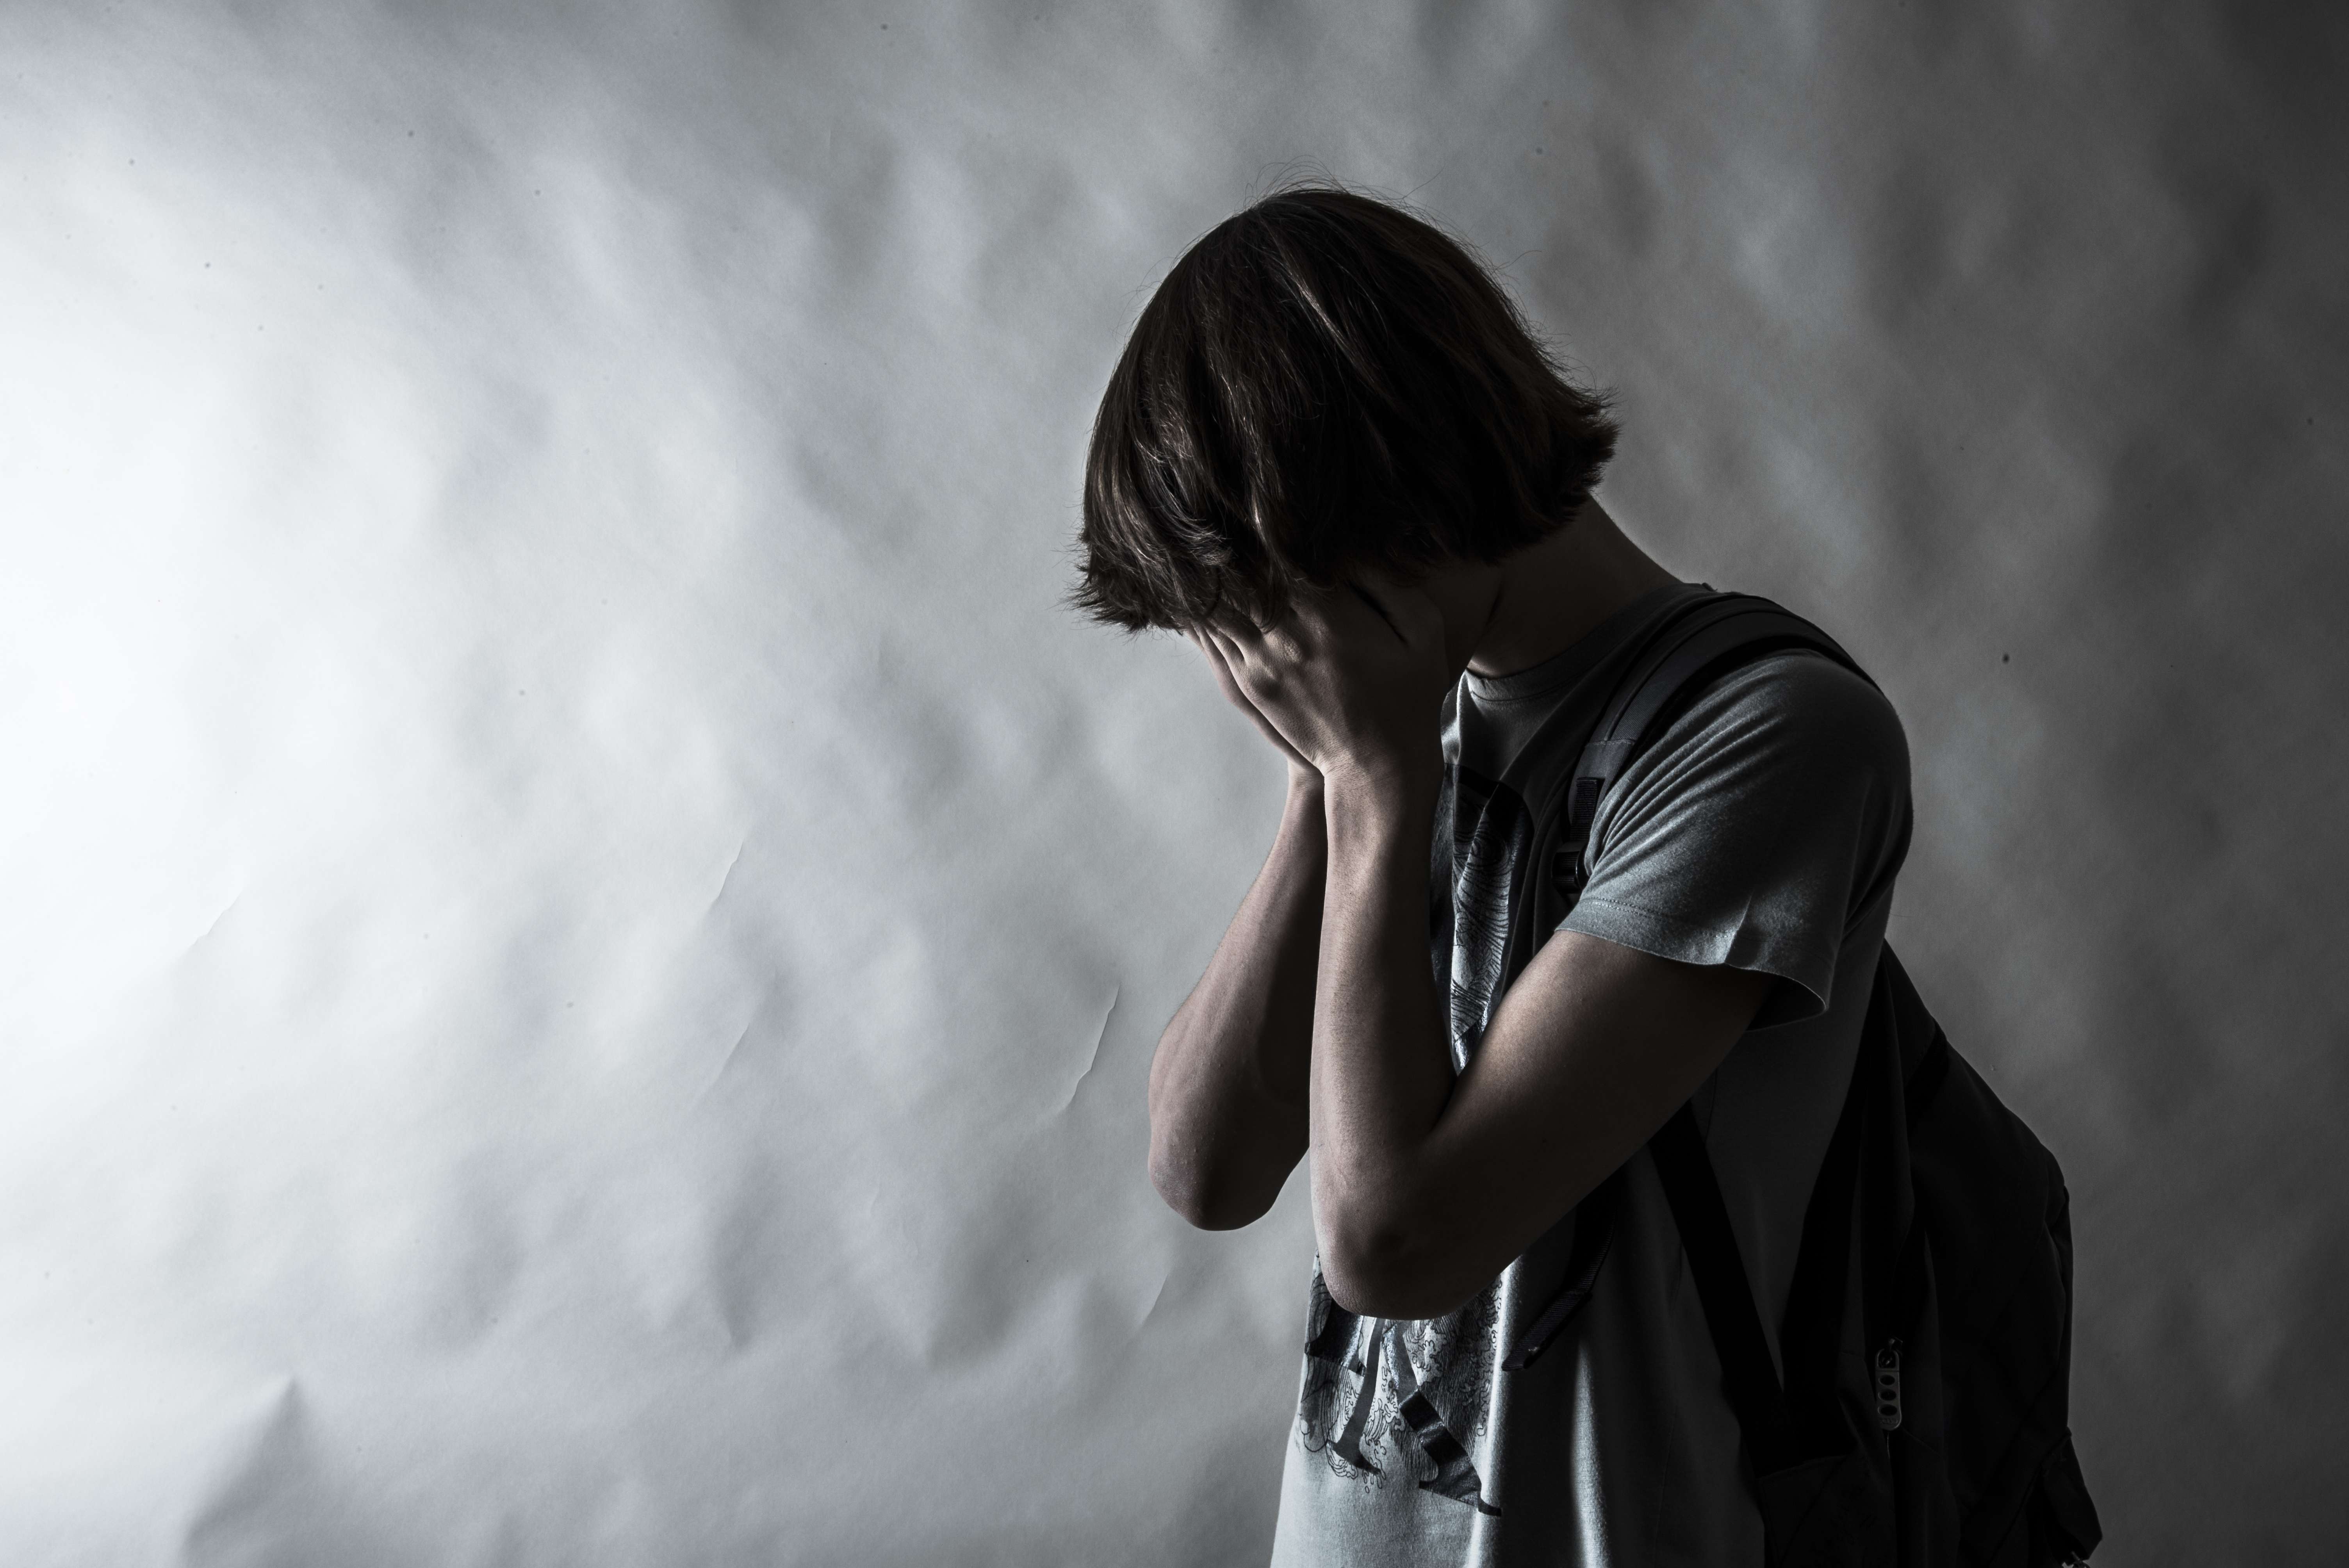 Hong Kong’s high-pressure lifestyles trigger a fear-driven cycle of parents pushing children harder in the hope of a better future for them, and young people feeling more pressure and stress than is appropriate for development. Photo: Shutterstock